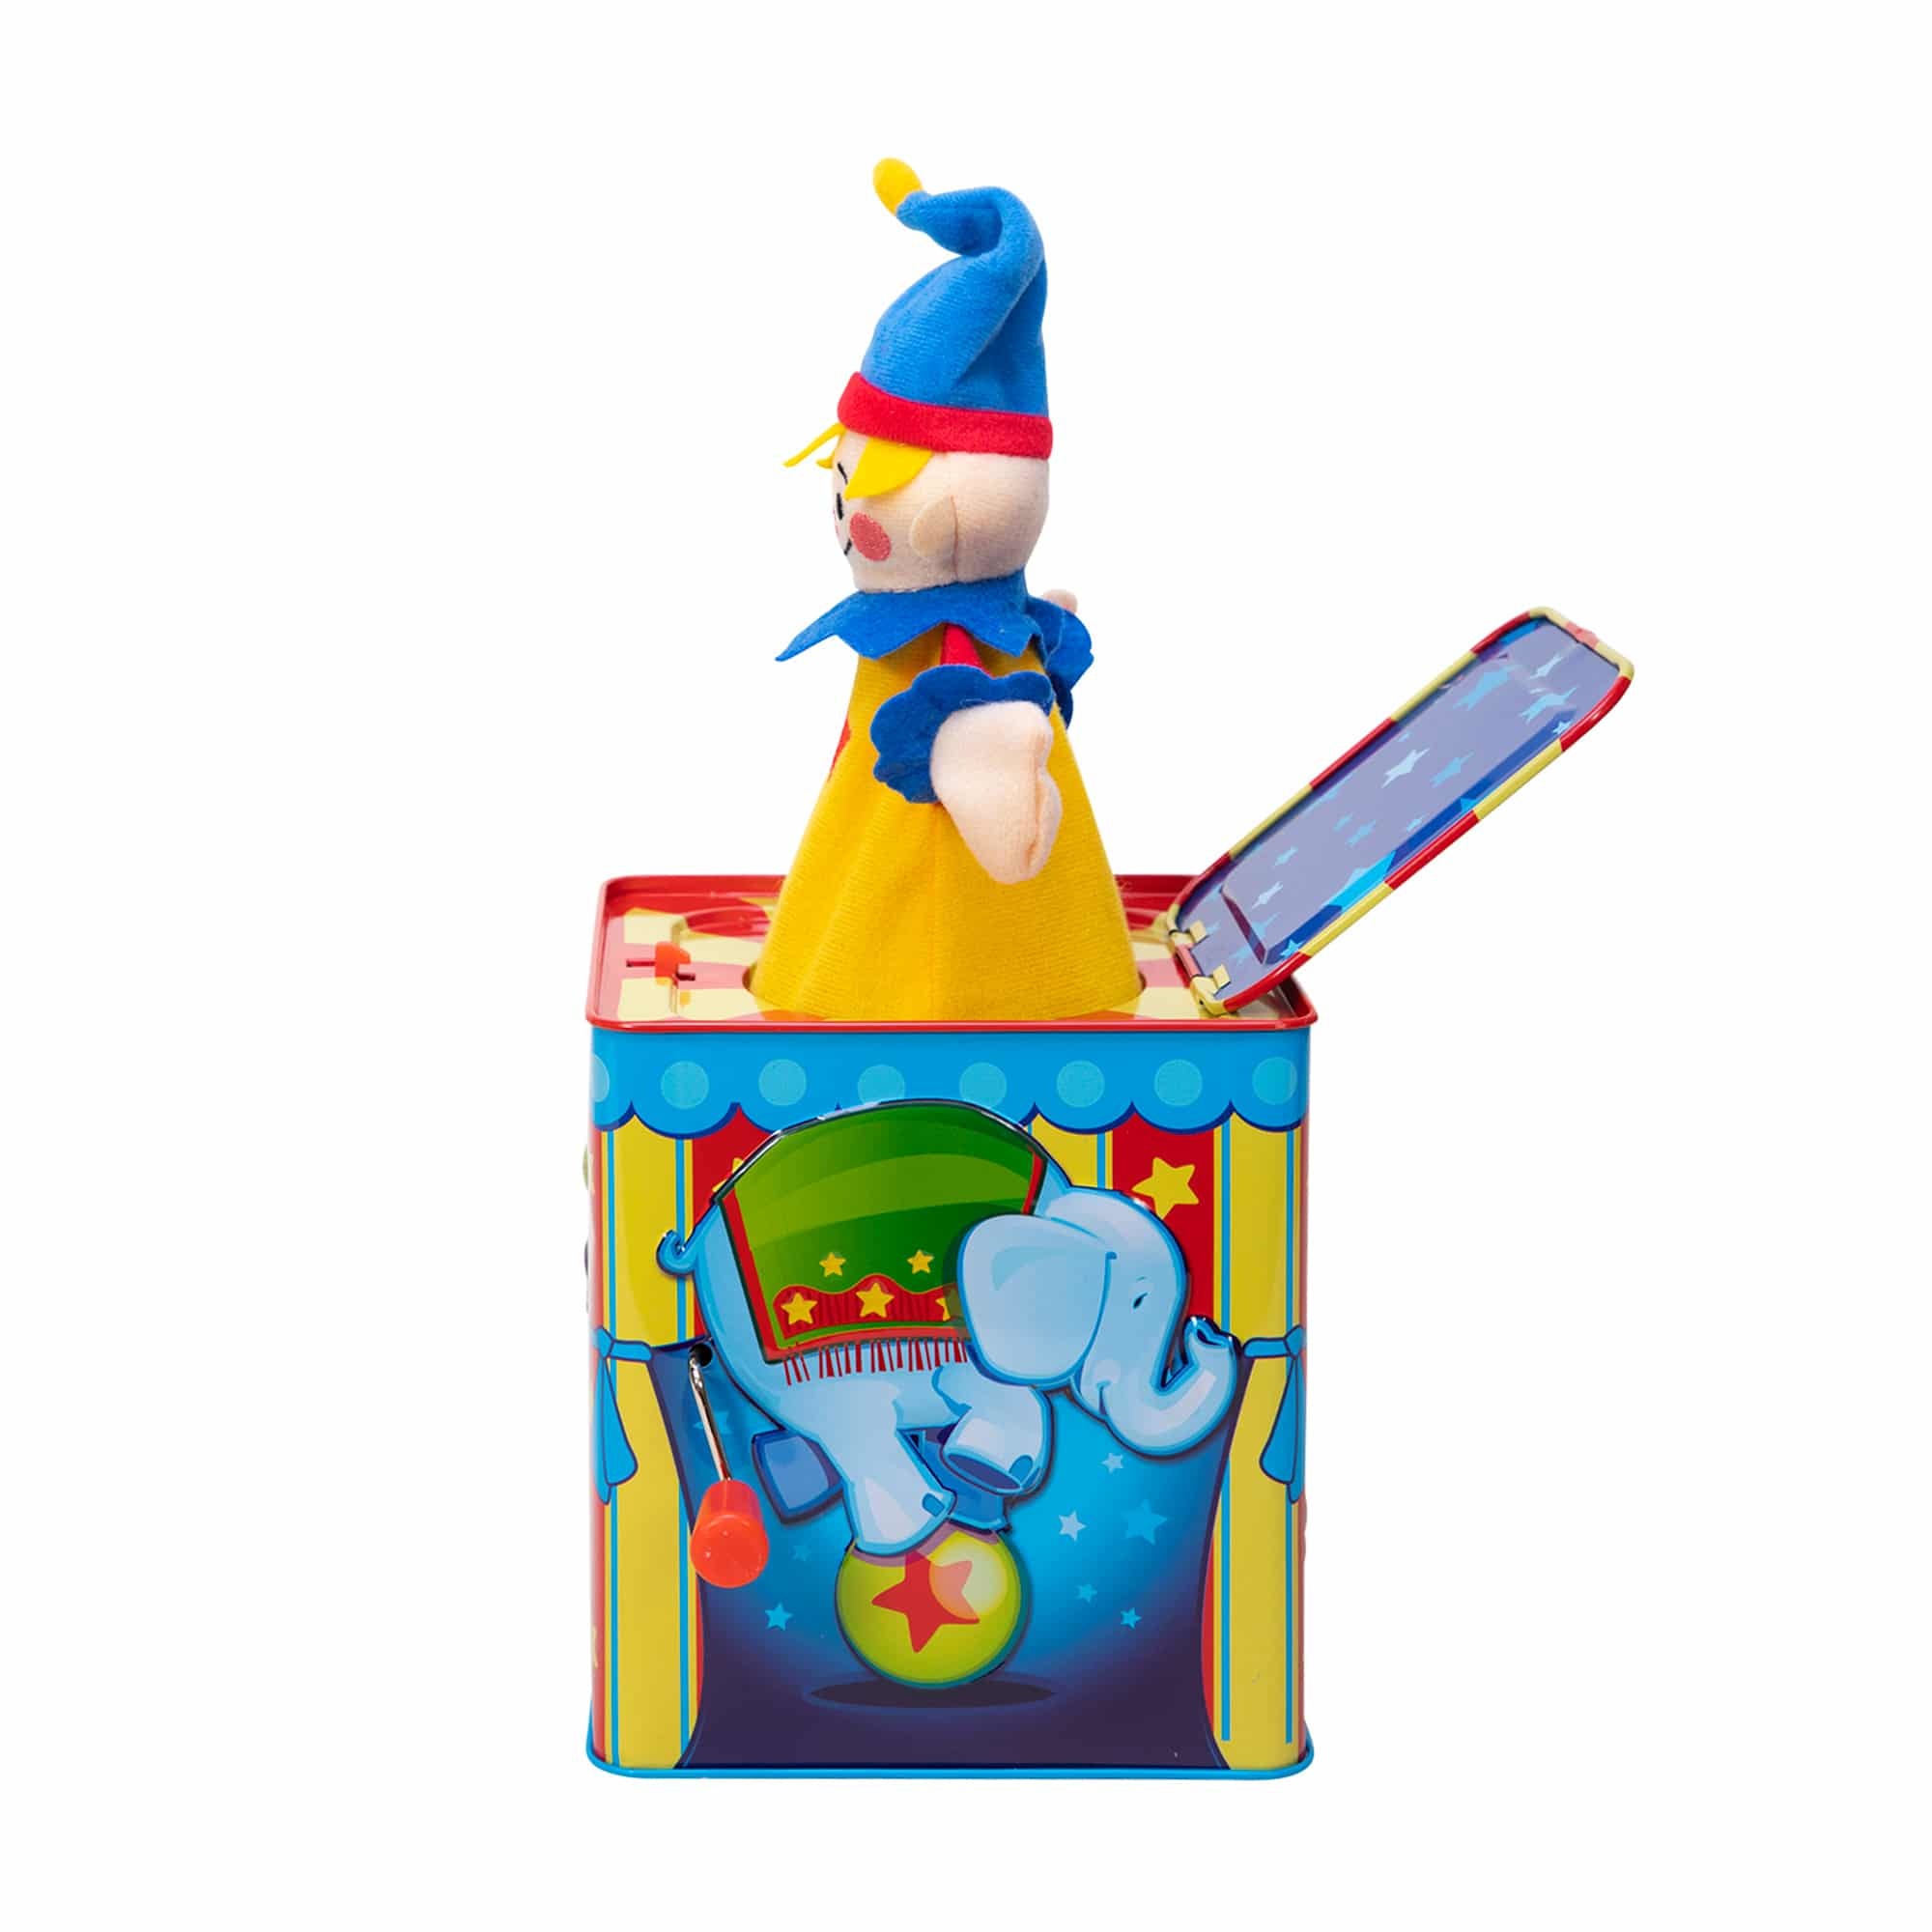 Infant & Preschool Silly Circus Jack In Box